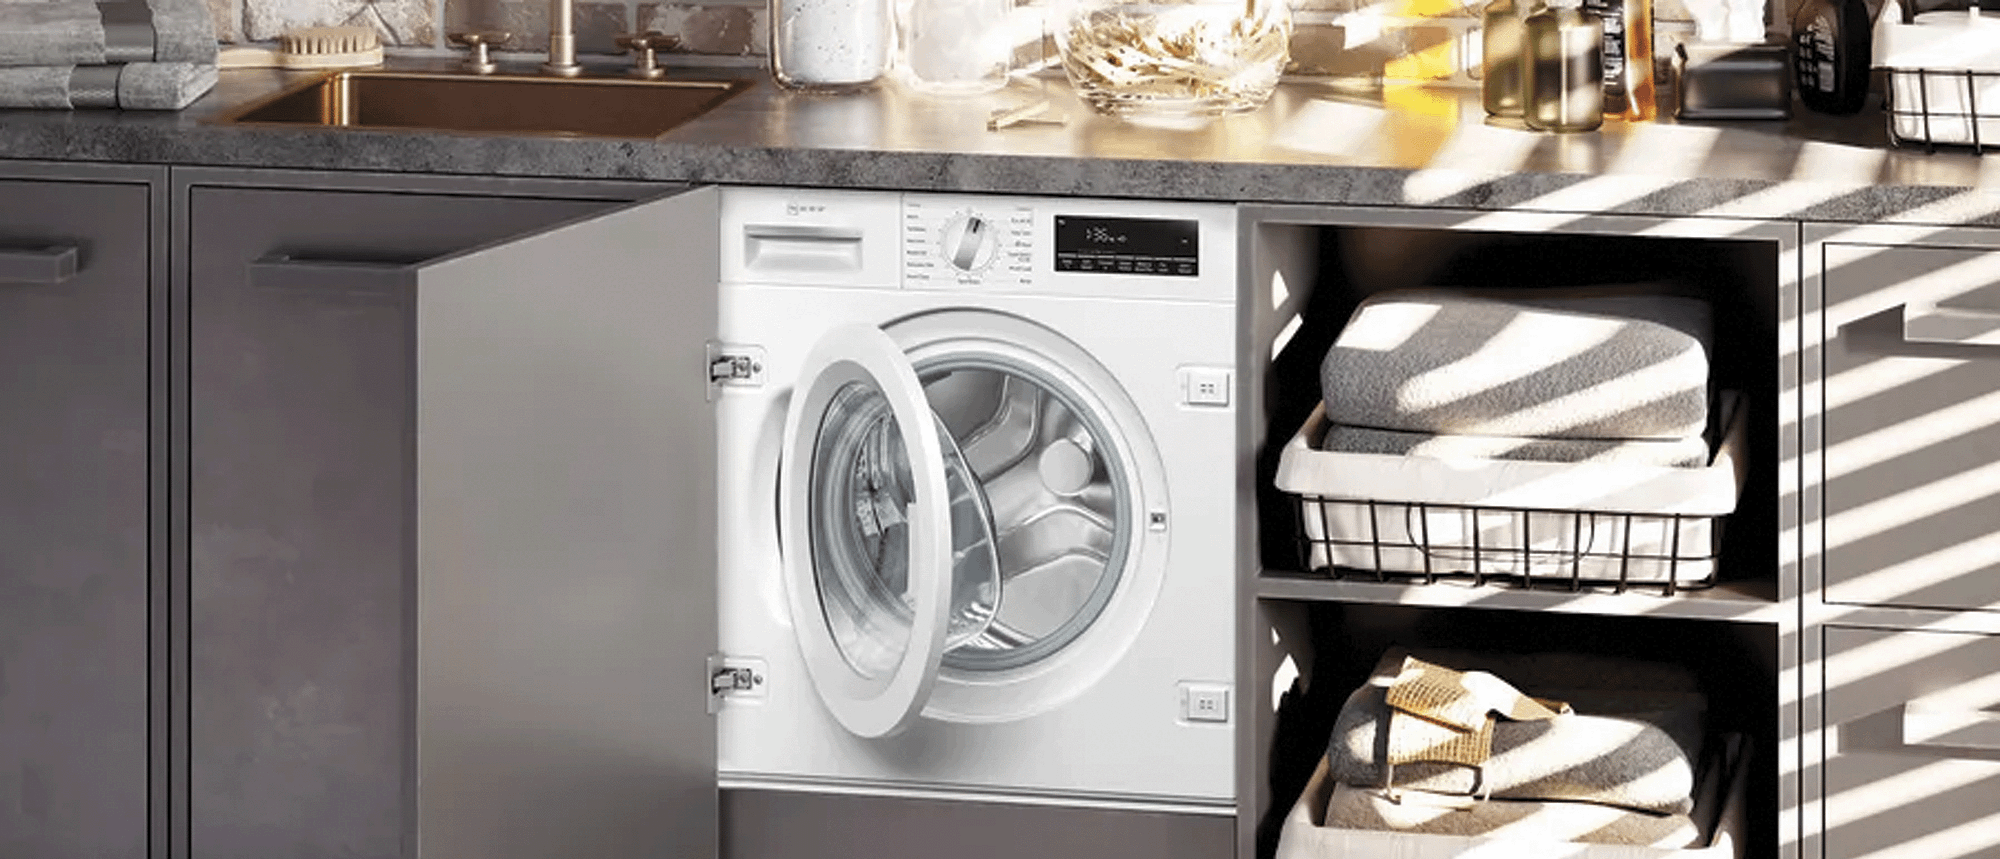 White Neff built-in washing machine with open door. Shelves are built in next to it with towels.